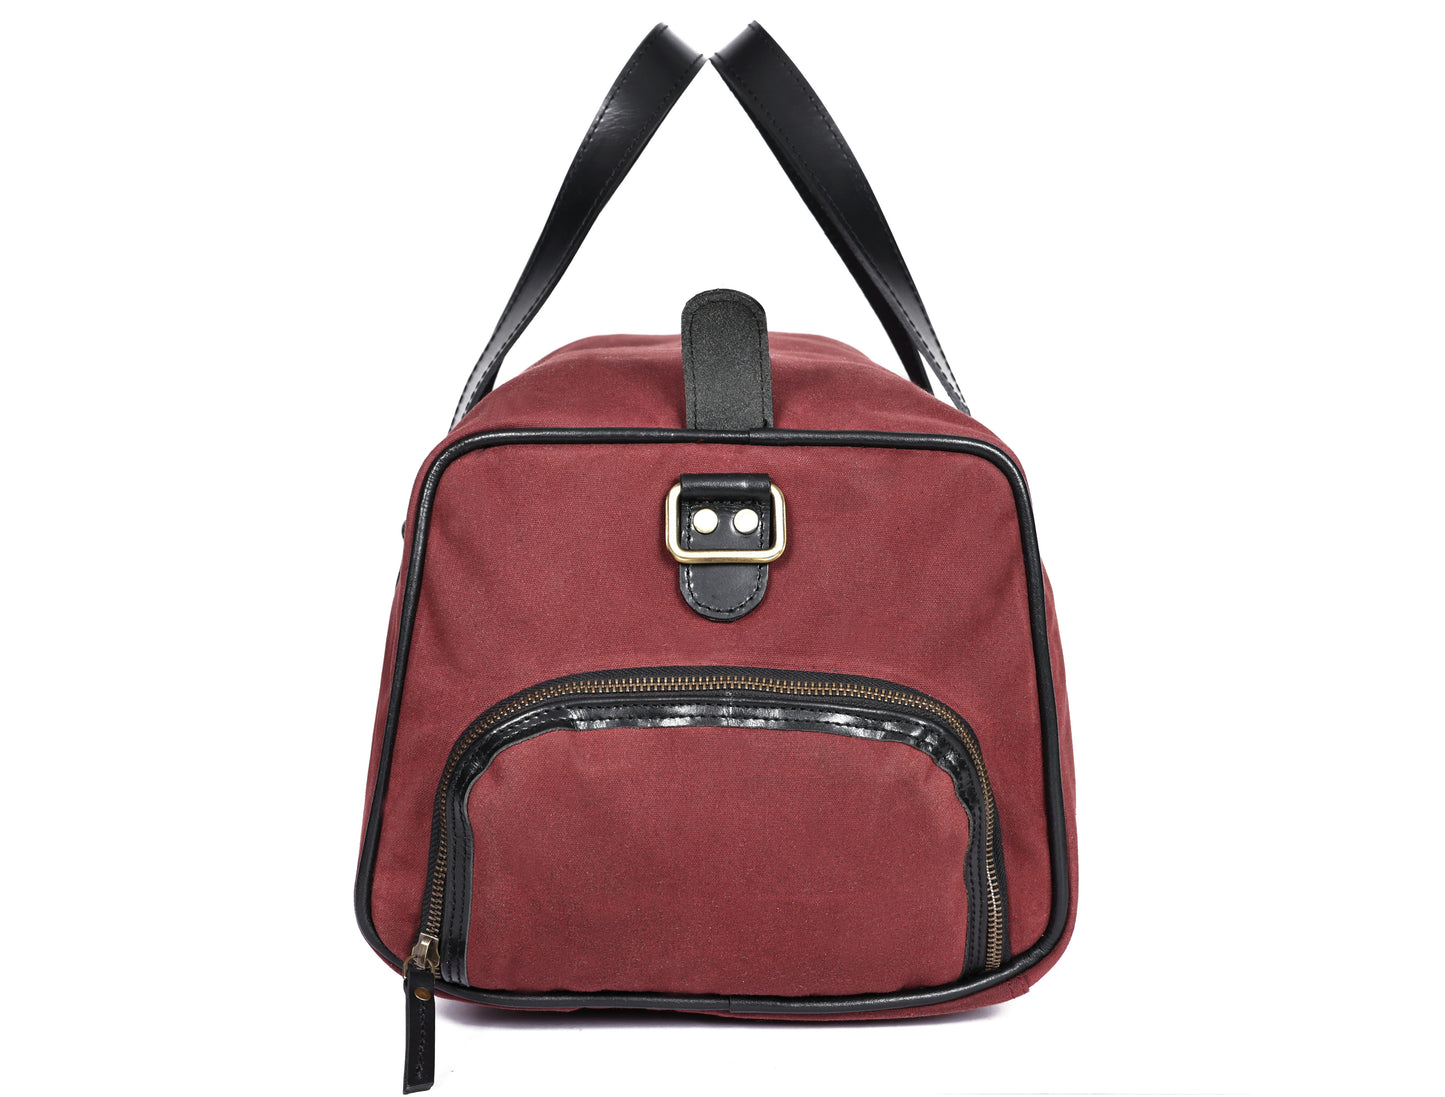 Stylish and Practical Small Gym Bag with Shoe Compartment, Art: BG-1458